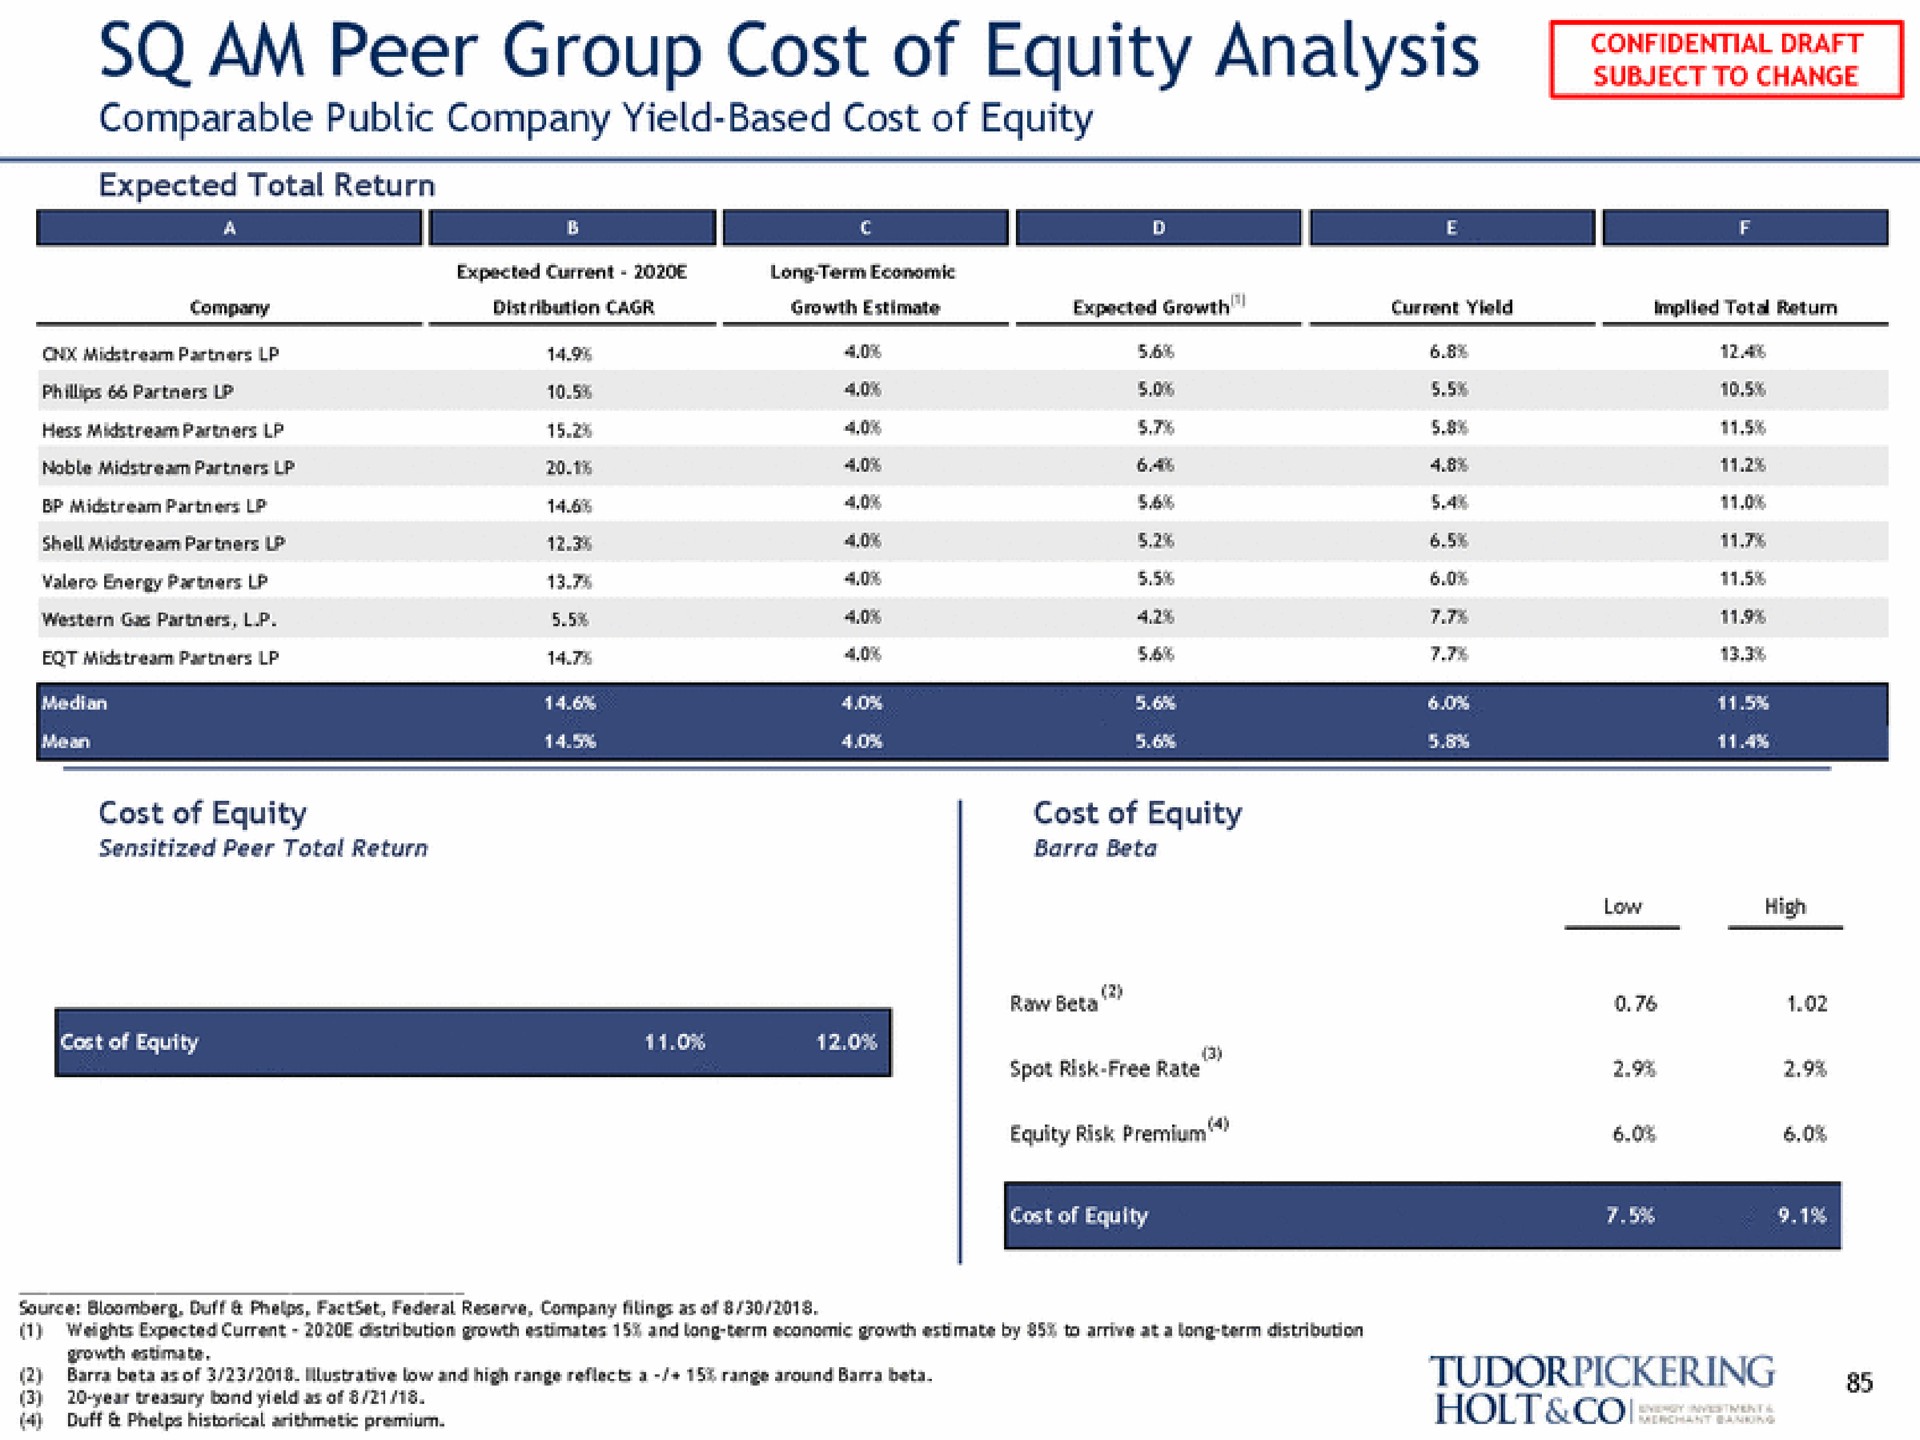 am peer group cost of equity analysis expected total return | Tudor, Pickering, Holt & Co